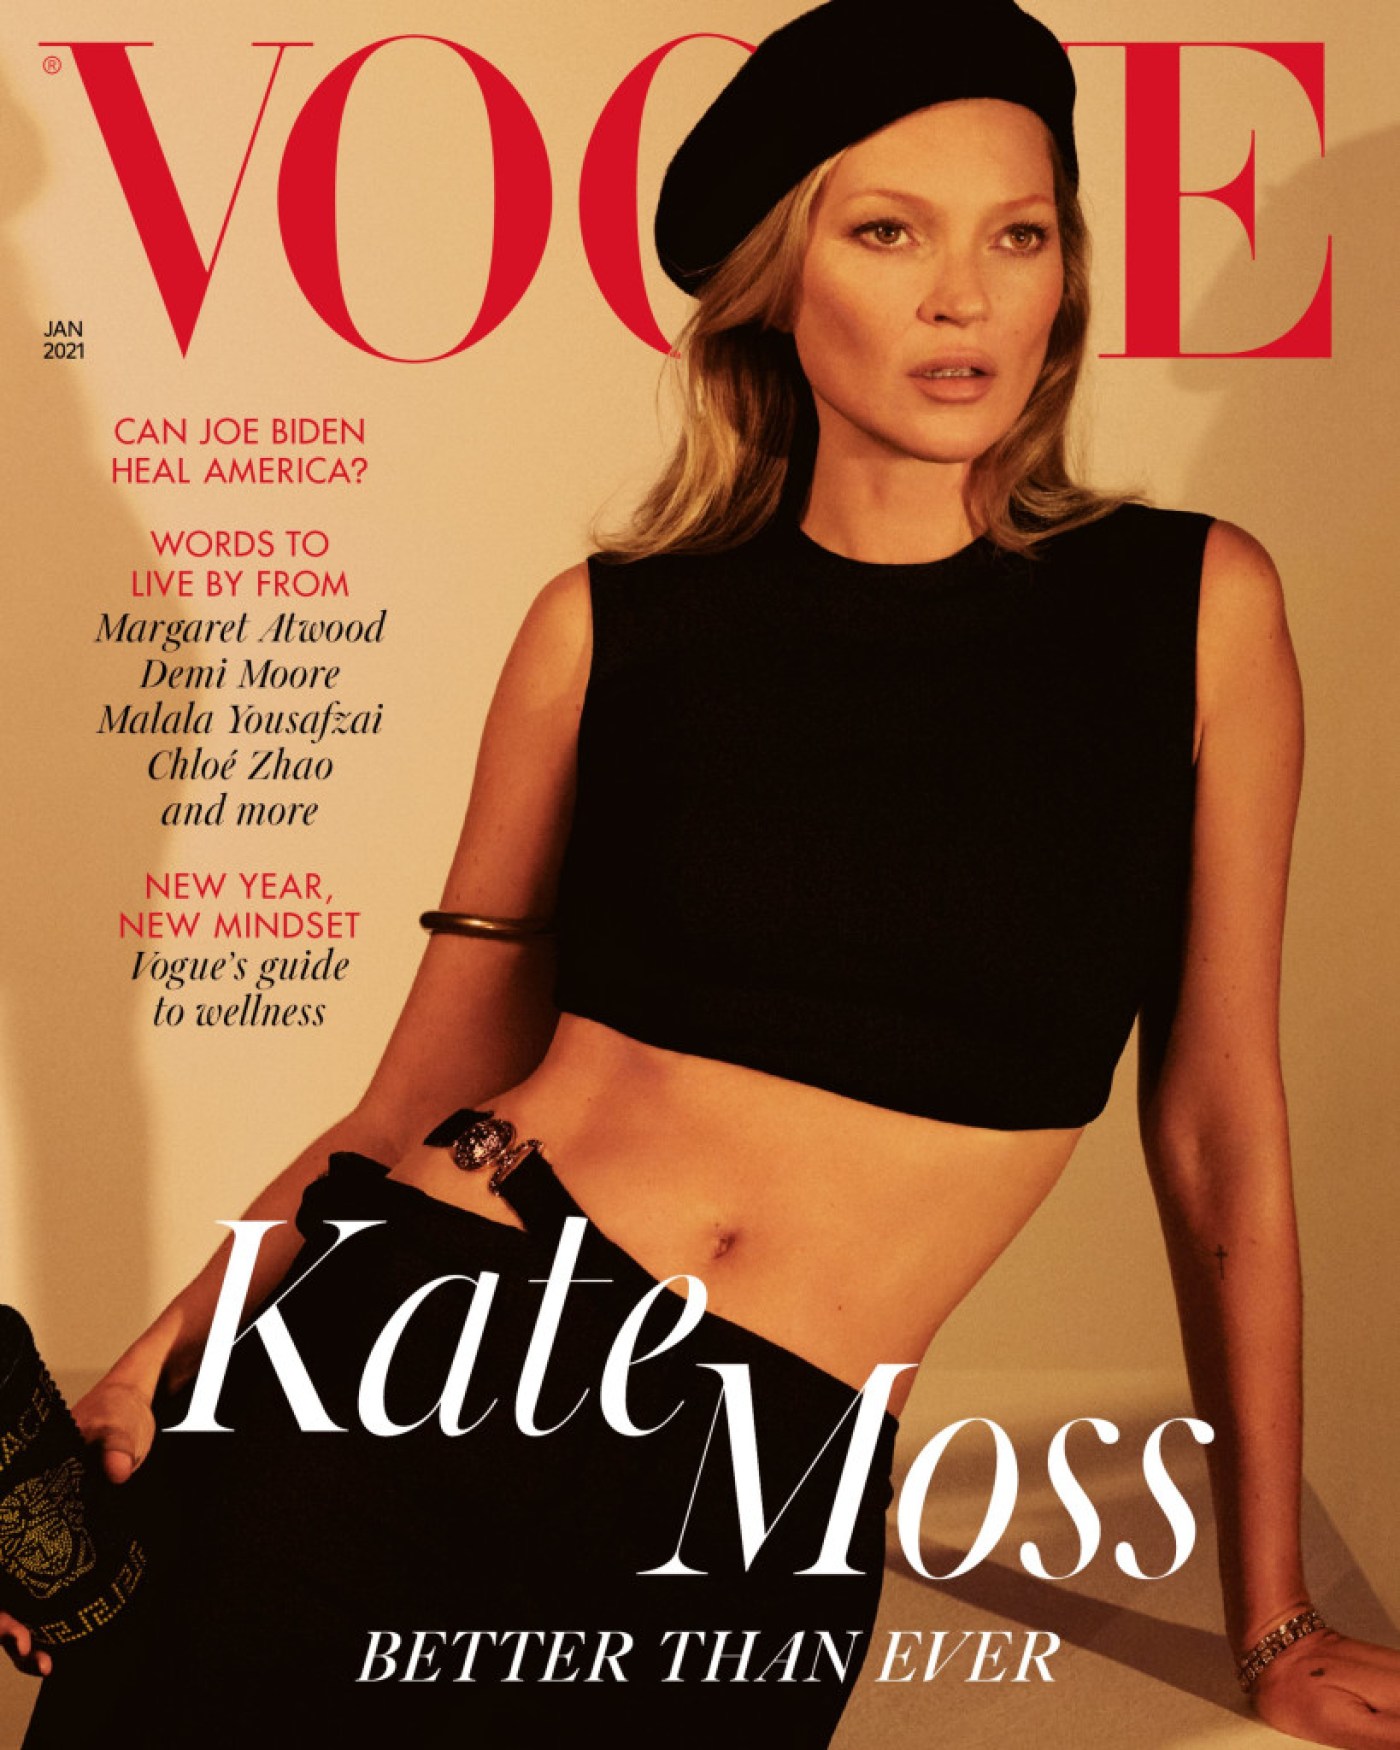 Kate Moss Vogue CREDIT LINE - Read the full feature in the January/February 2021 issue of British Vogue available via digital download and on newsstands Friday 4 December ARTICLES MUST LINK BACK: https://www.vogue.co.uk/news/article/kate-moss-british-vogue-january-2021 PHOTOGRAPHY CREDIT - Mert Alas and Marcus Piggott COVER IMAGES MUST BE USED ALONGSIDE INSET IMAGE: https://we.tl/t-0cJklpfAIk IMAGES CANNOT BE CROPPED OR ALTERED ONE USE ONLY**